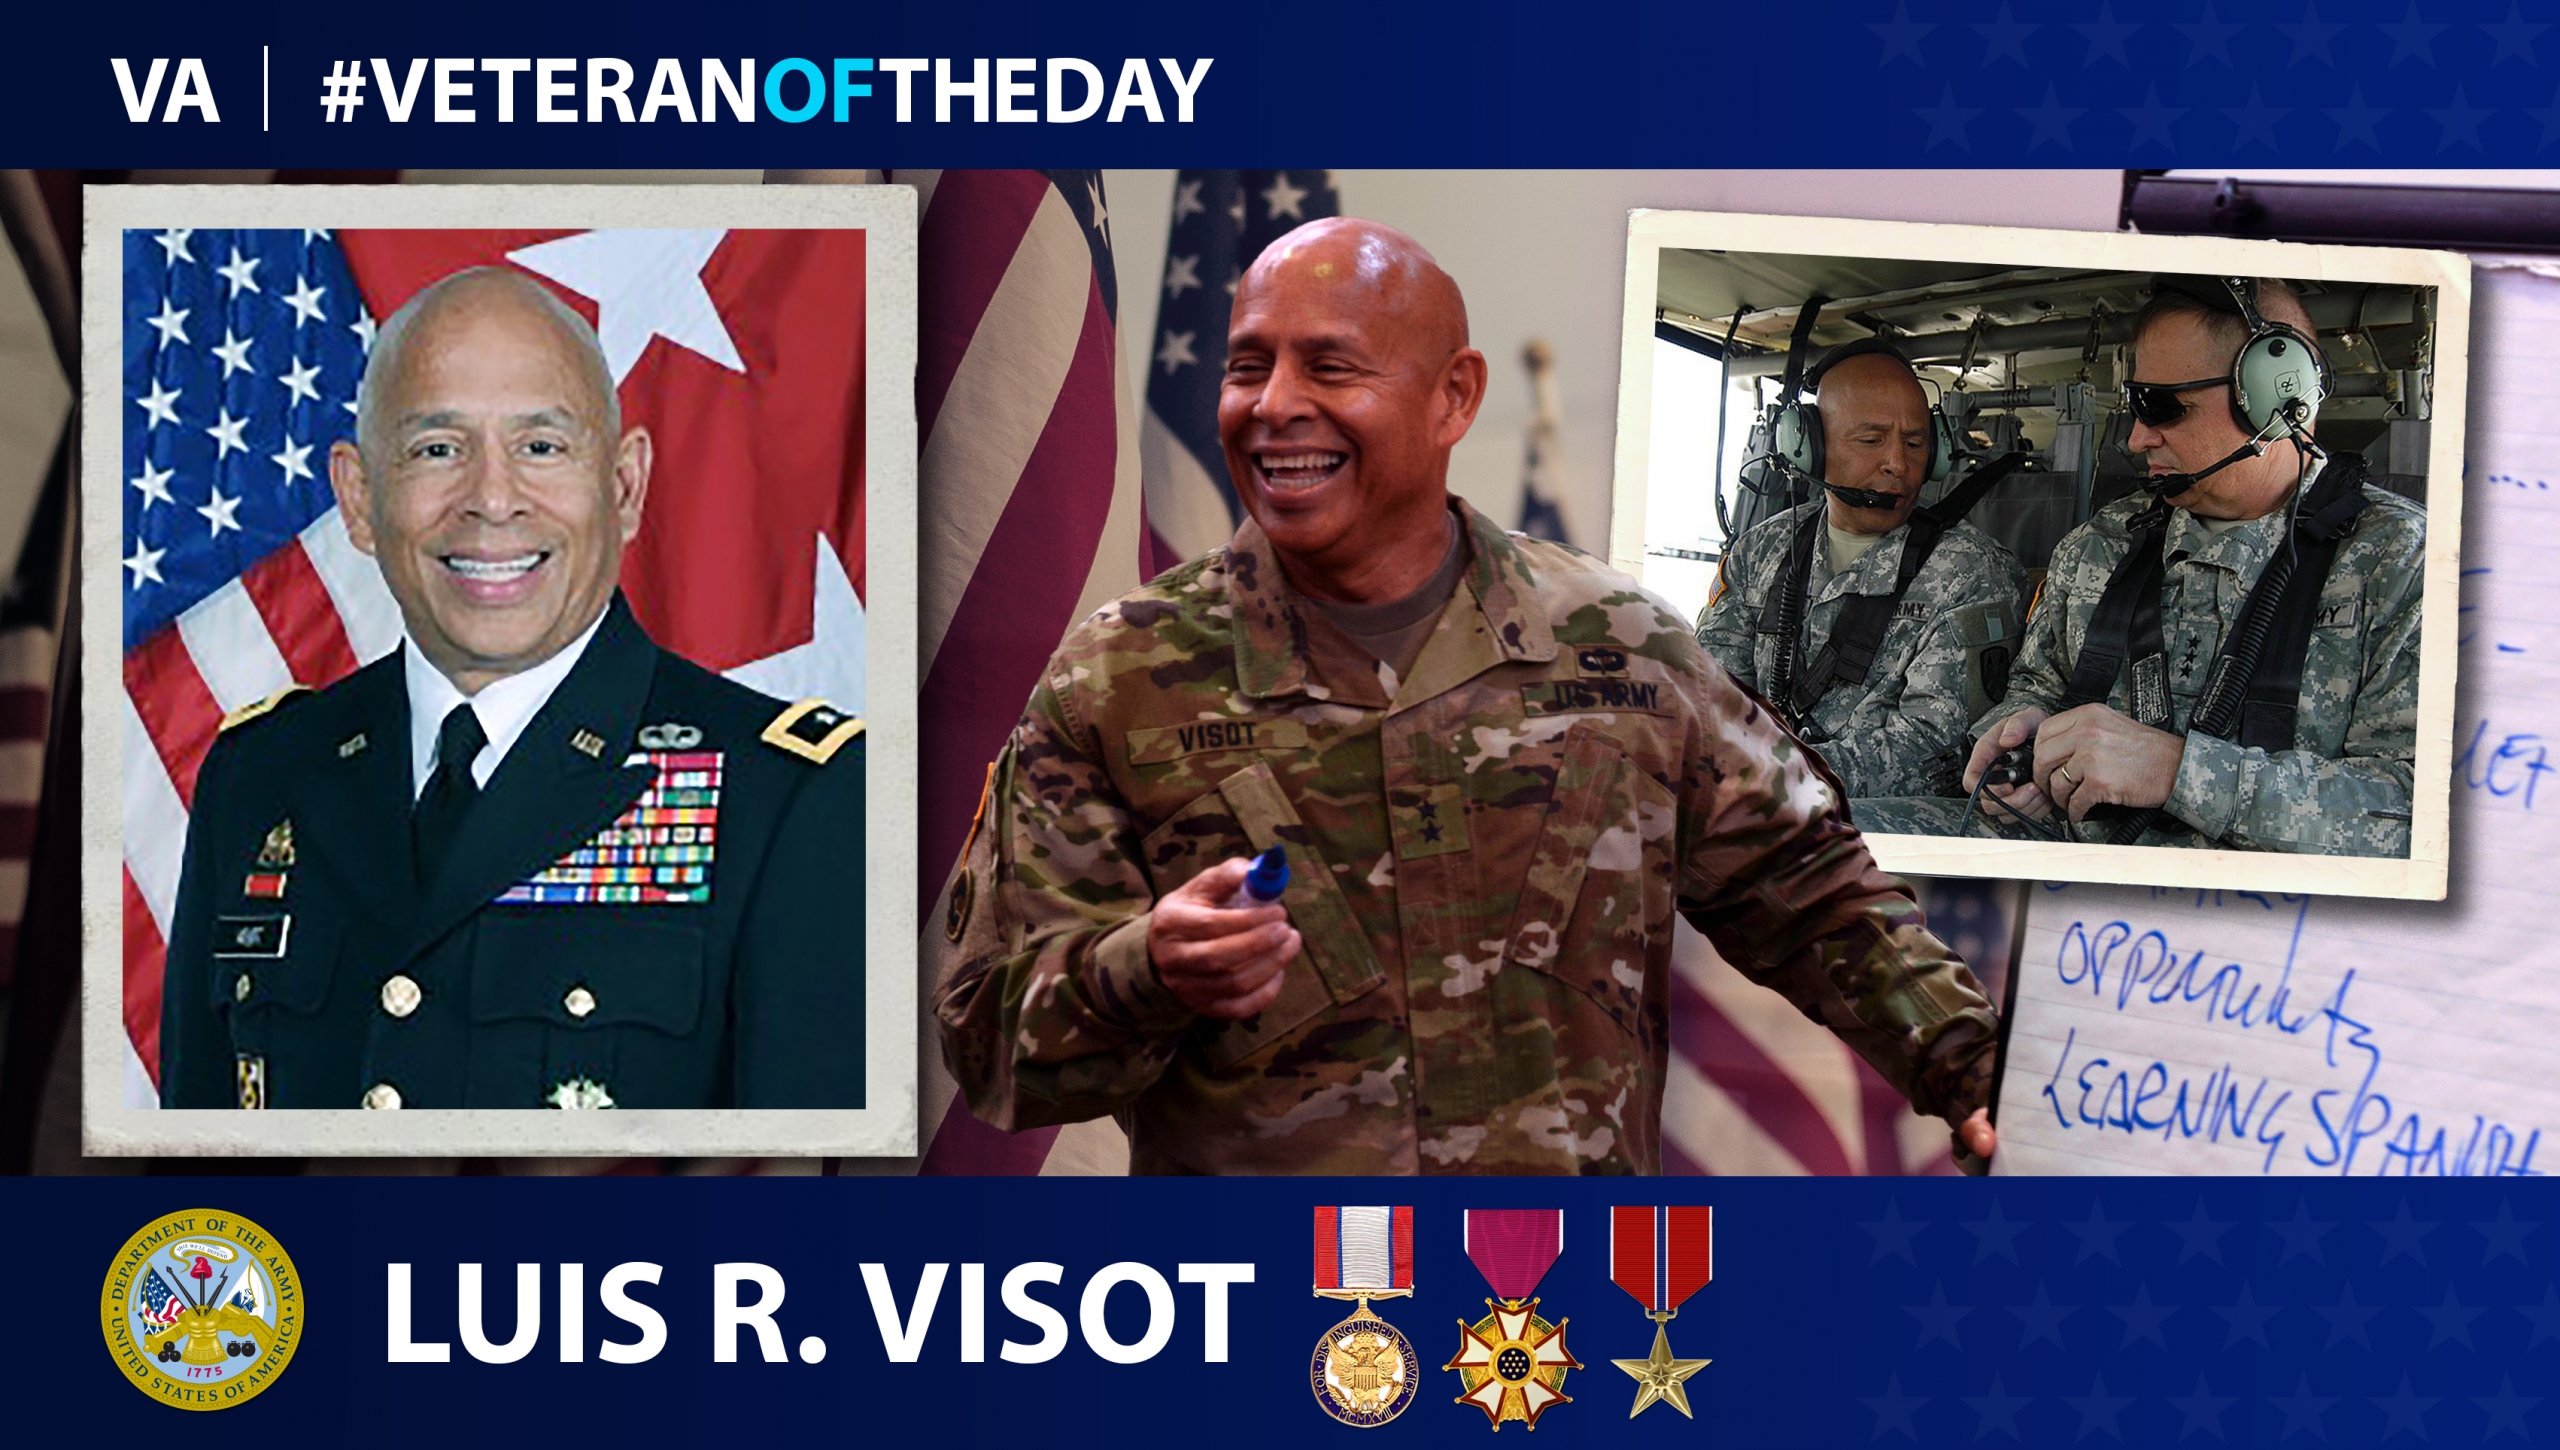 Army Veteran Luis R. Visot is today's Veteran of the Day.